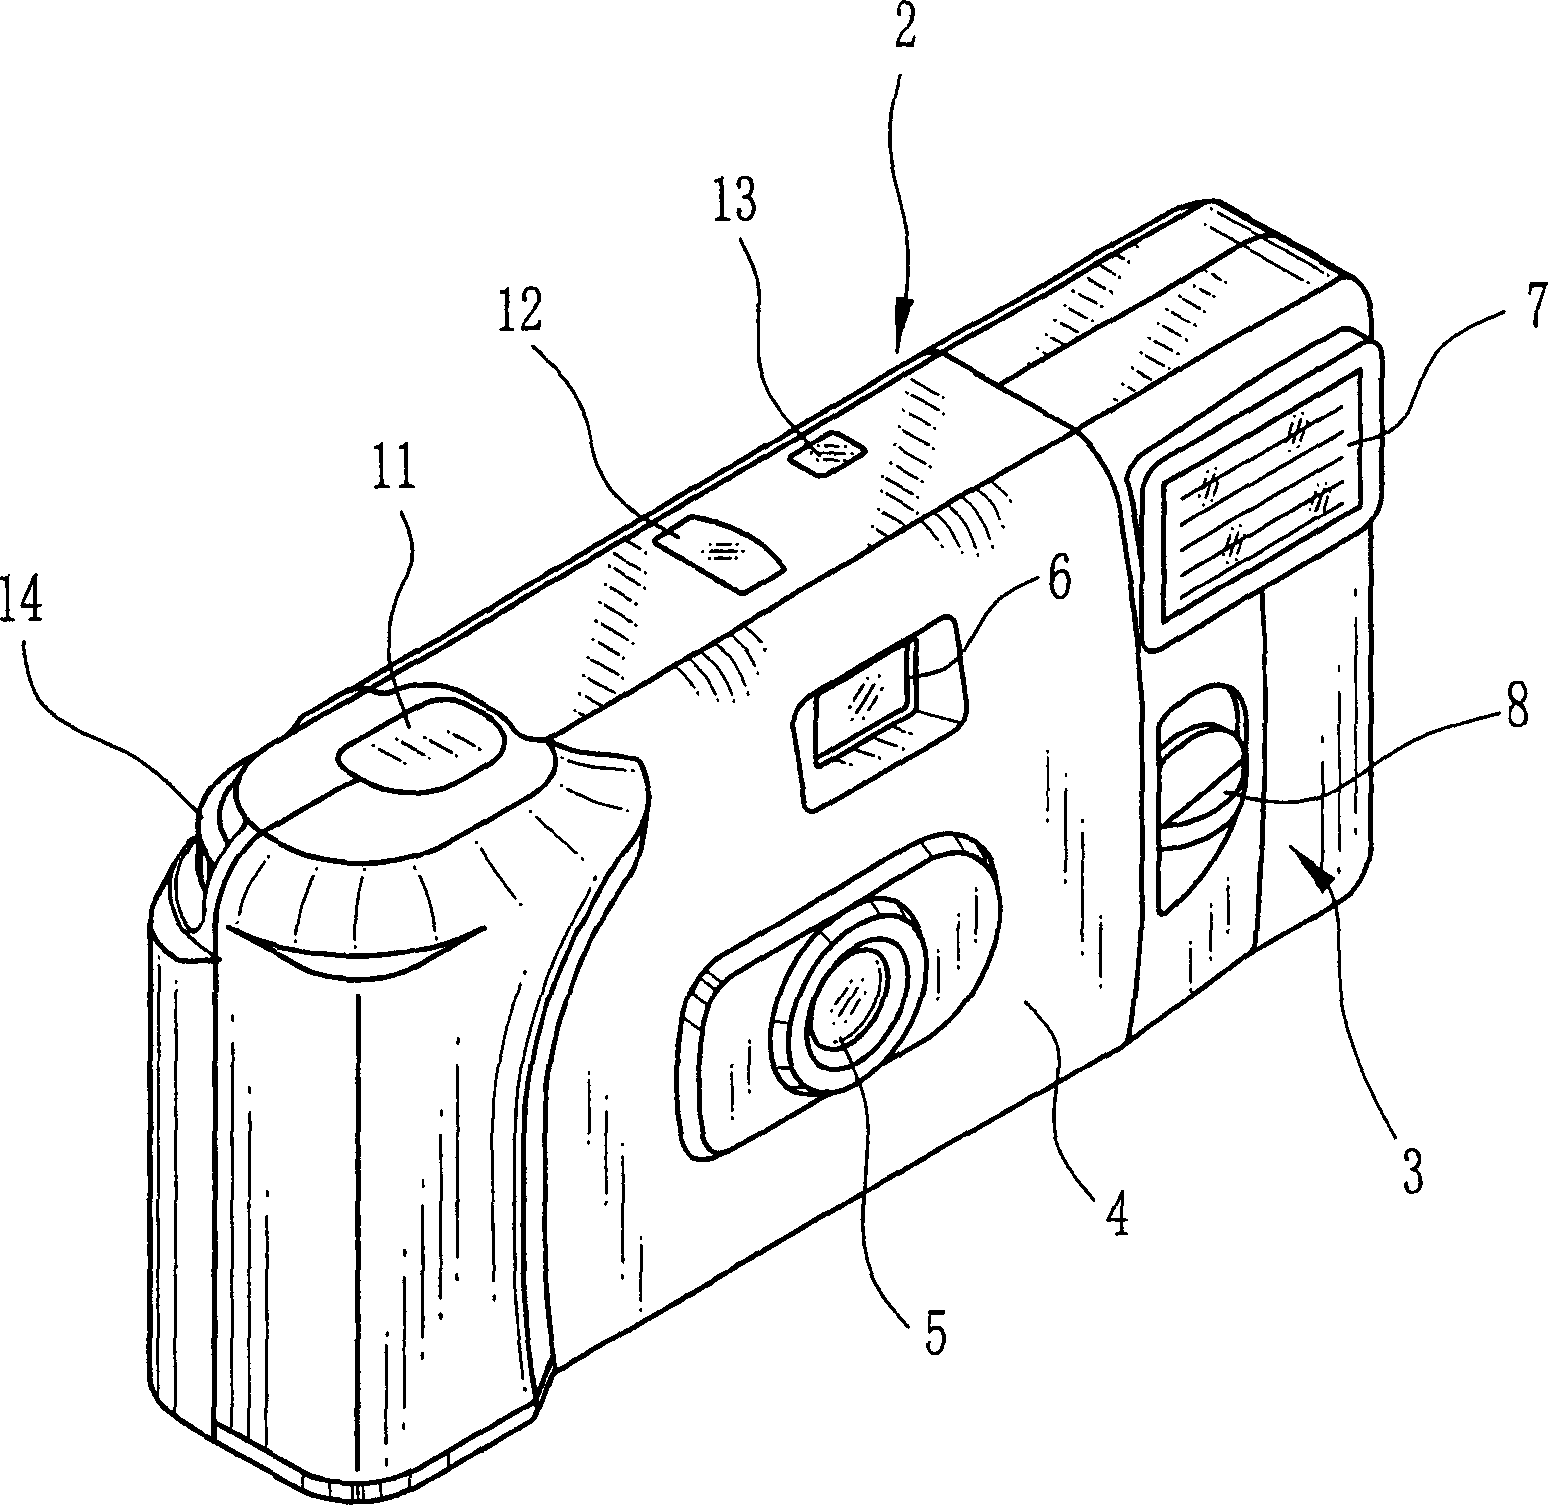 Lens-fitted photo film unit and battery thereof